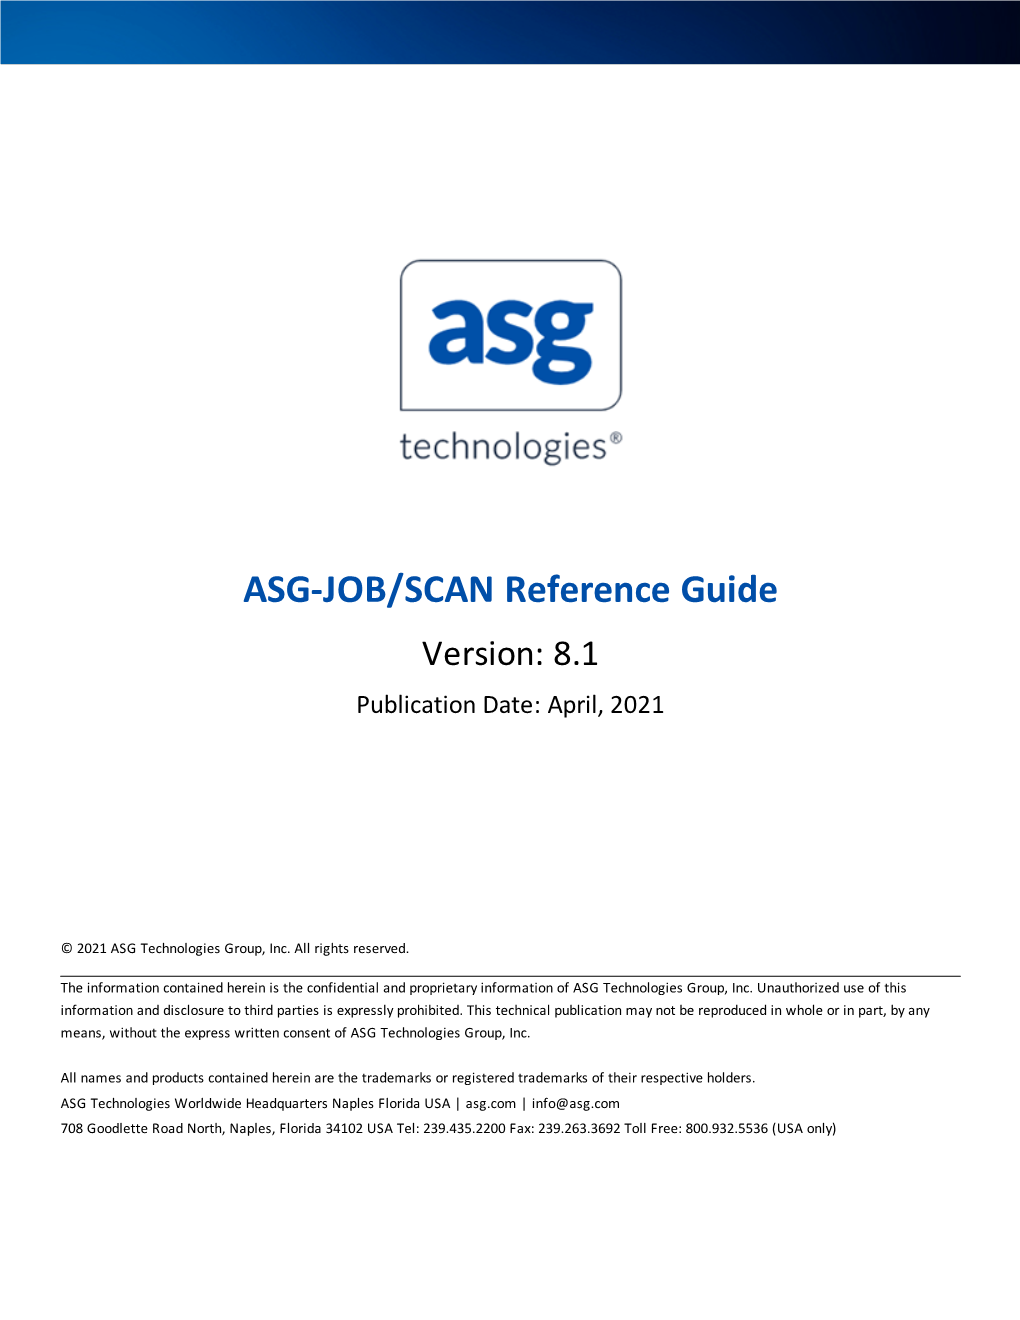 ASG-JOB/SCAN Reference Guide Version: 8.1 Publication Date: April, 2021